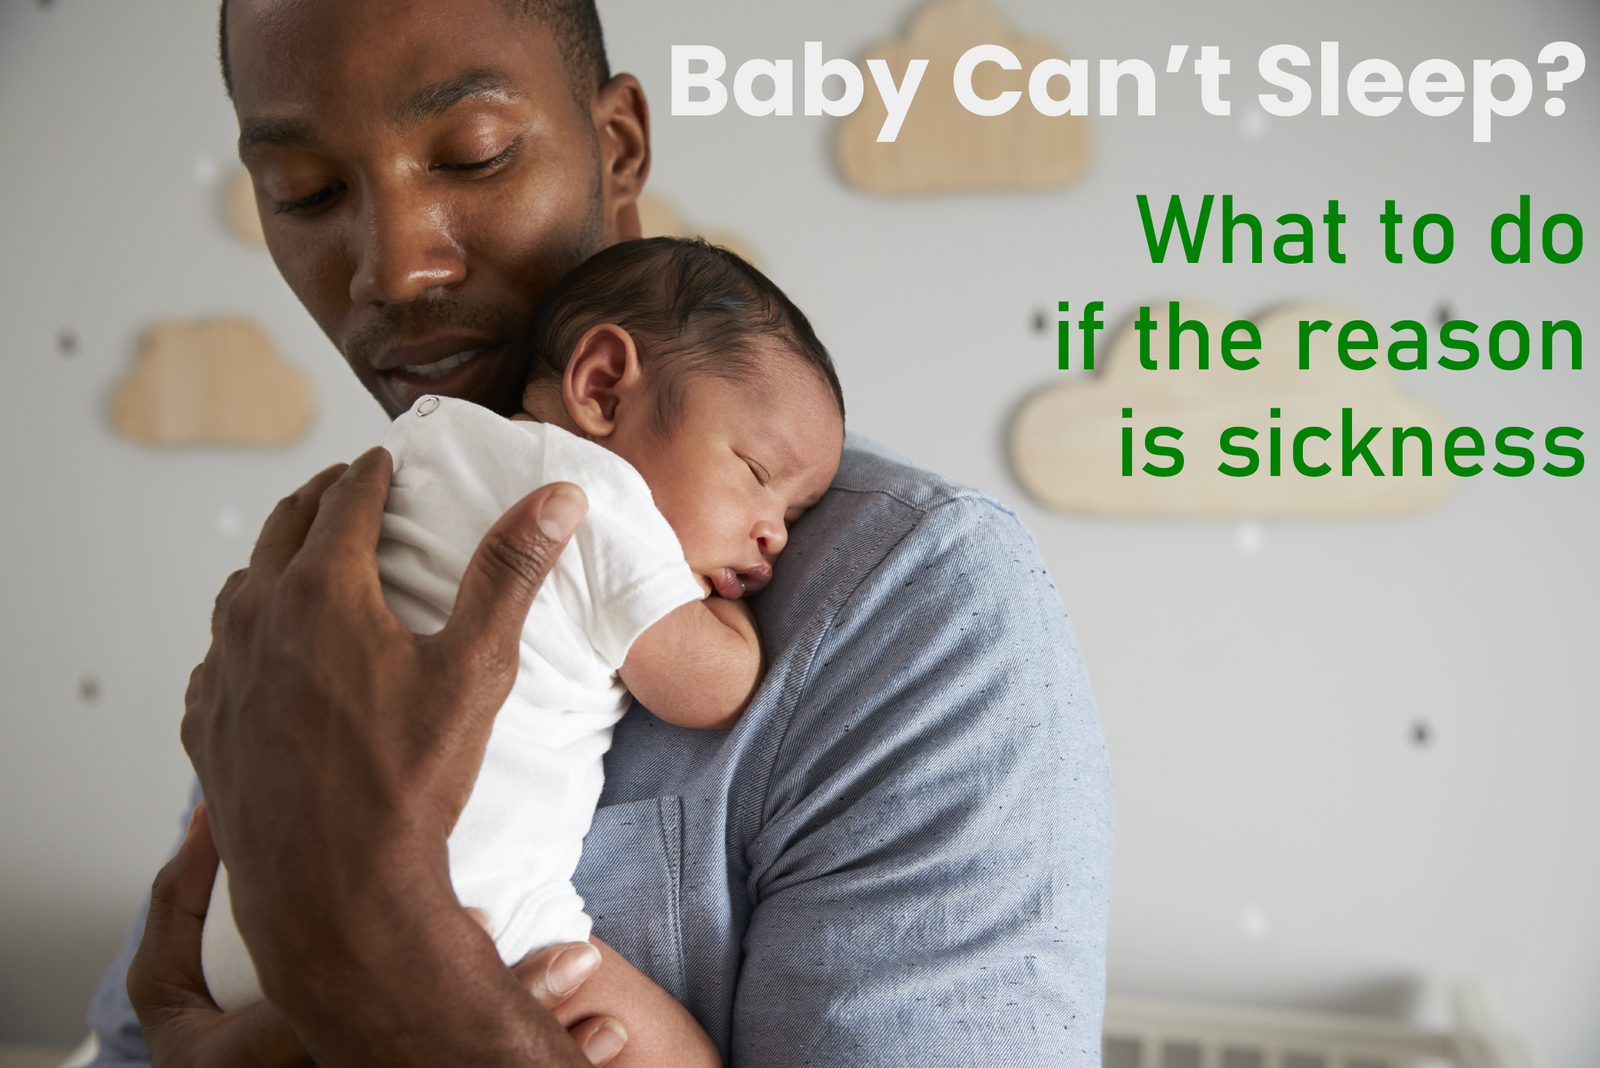 Baby Can’t Sleep? What to Do if the Reason Is Sickness